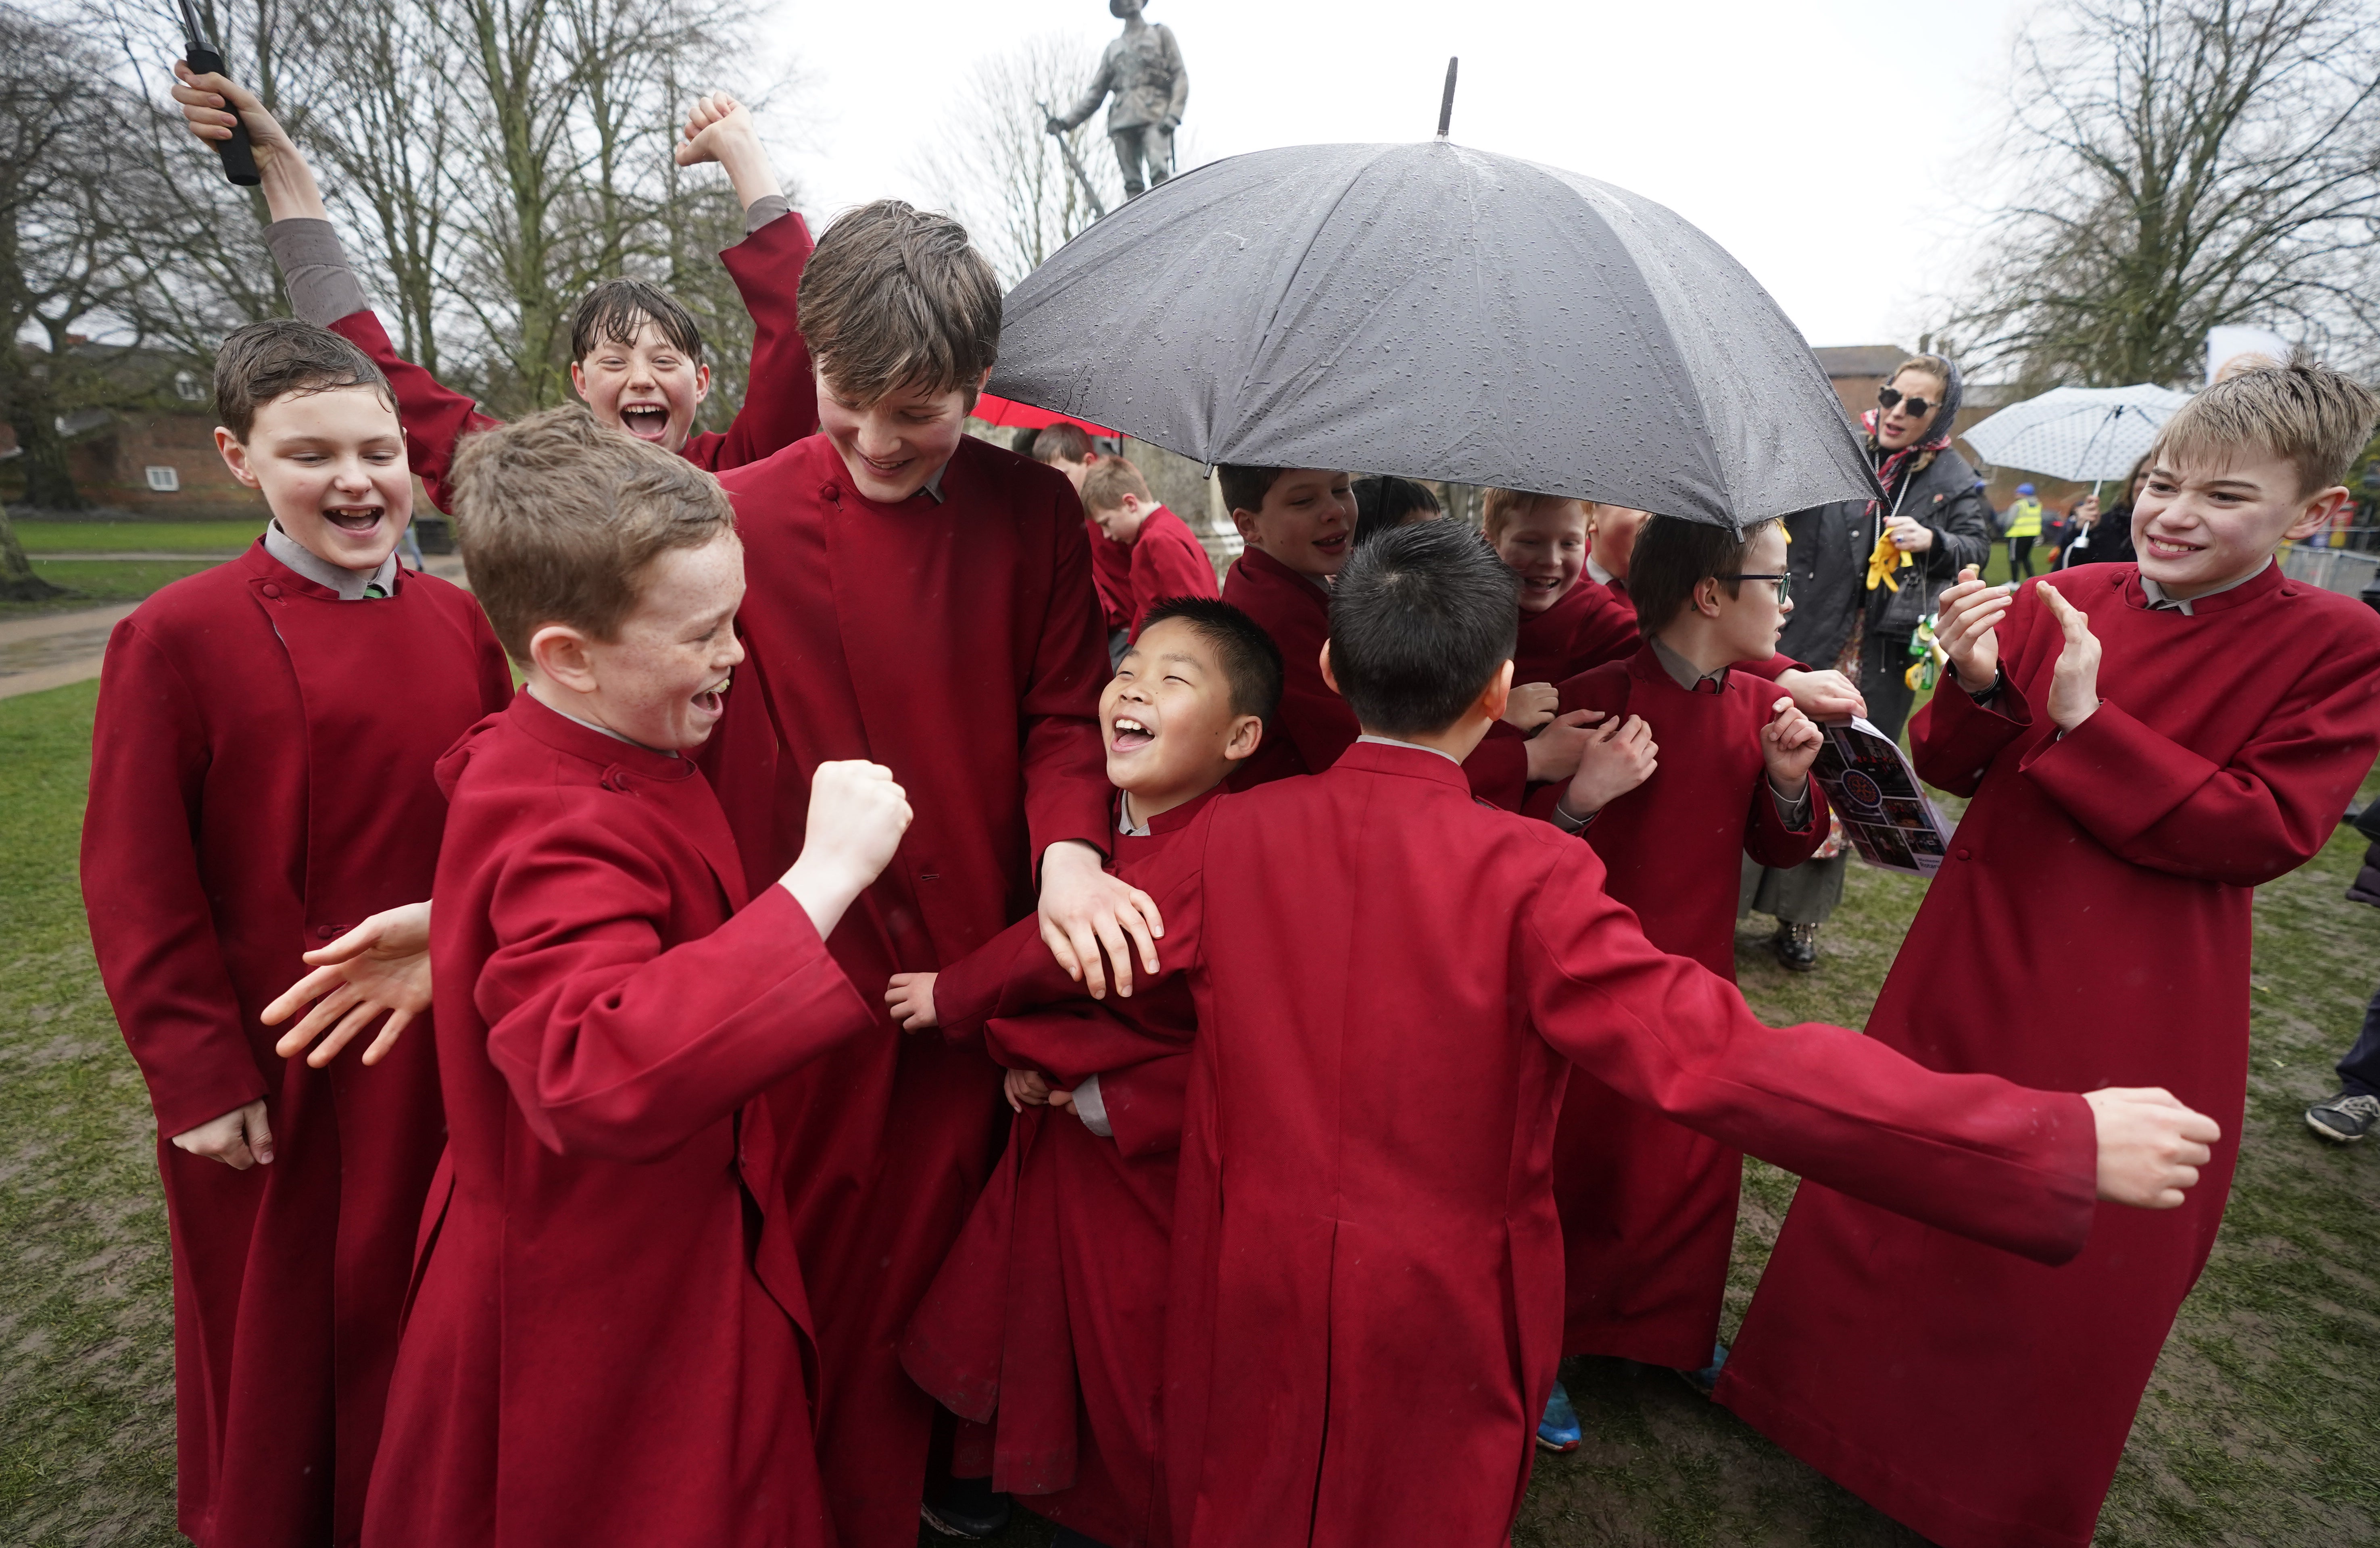 Choristers celebrate after one of their teams won the pancake race (Andrew Matthews/PA)